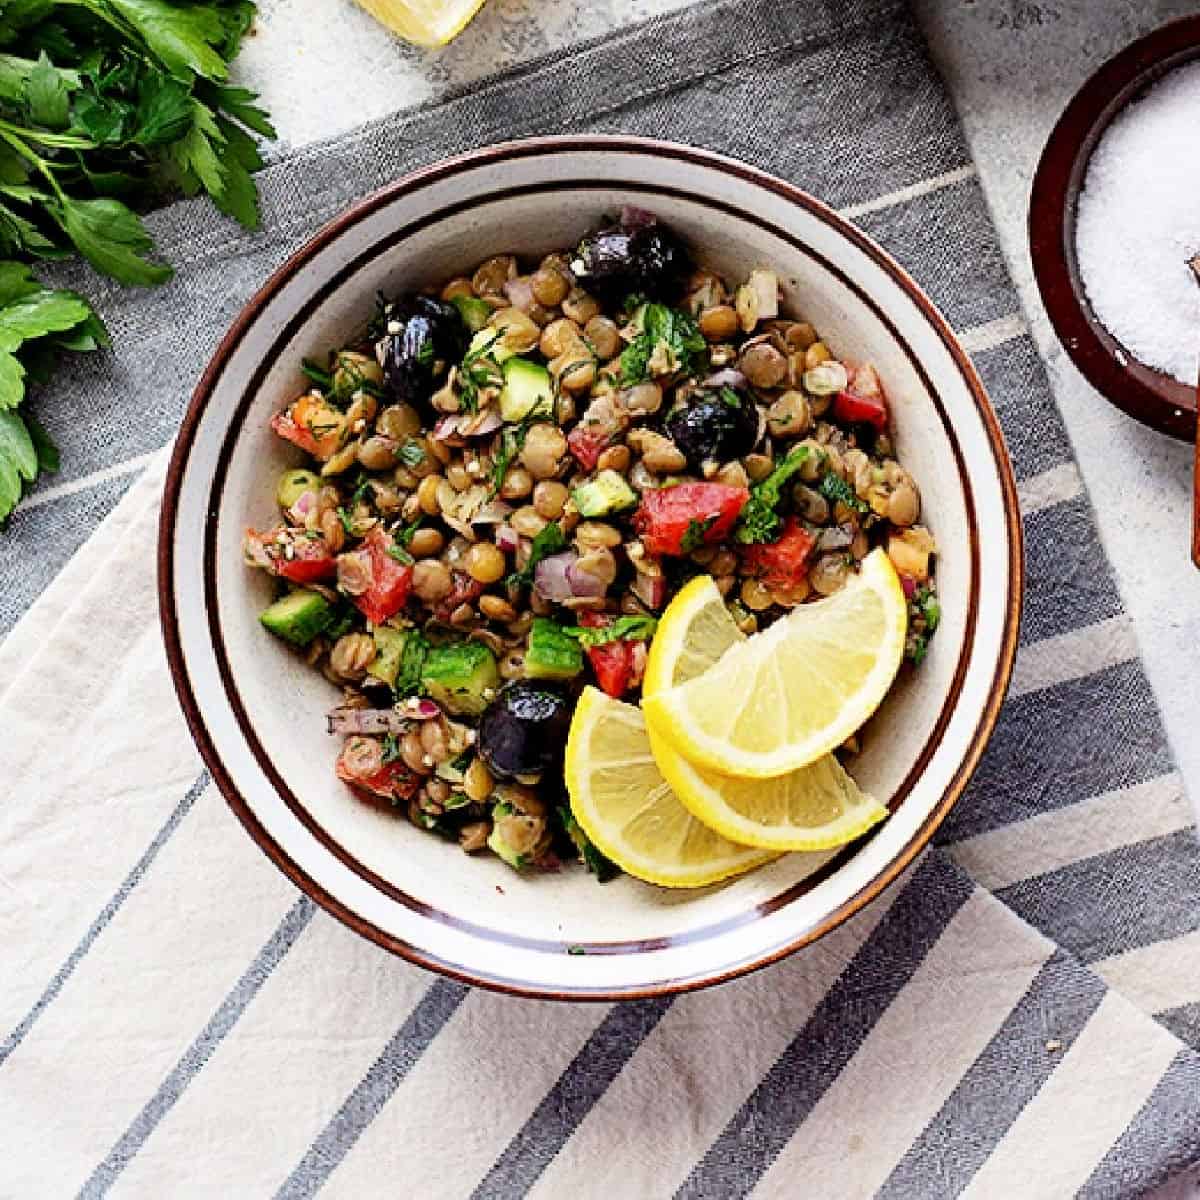 This Mediterranean lentil salad is healthy and very easy to make. Loaded with delicious vegetables, this salad is ready in about 30 minutes!
